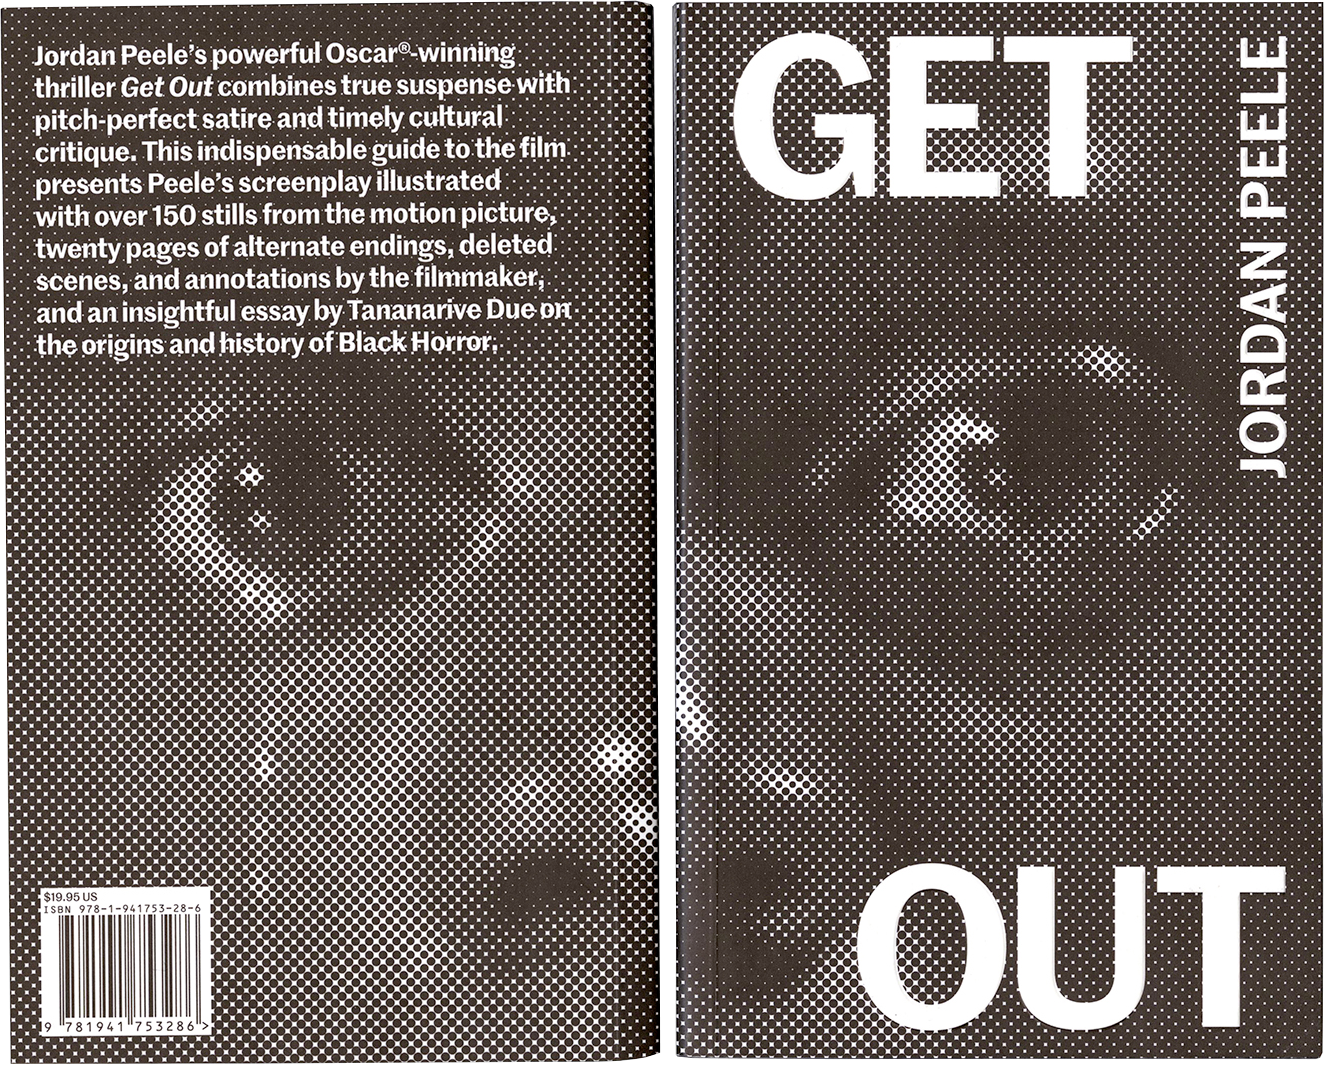 Get Out back and front cover